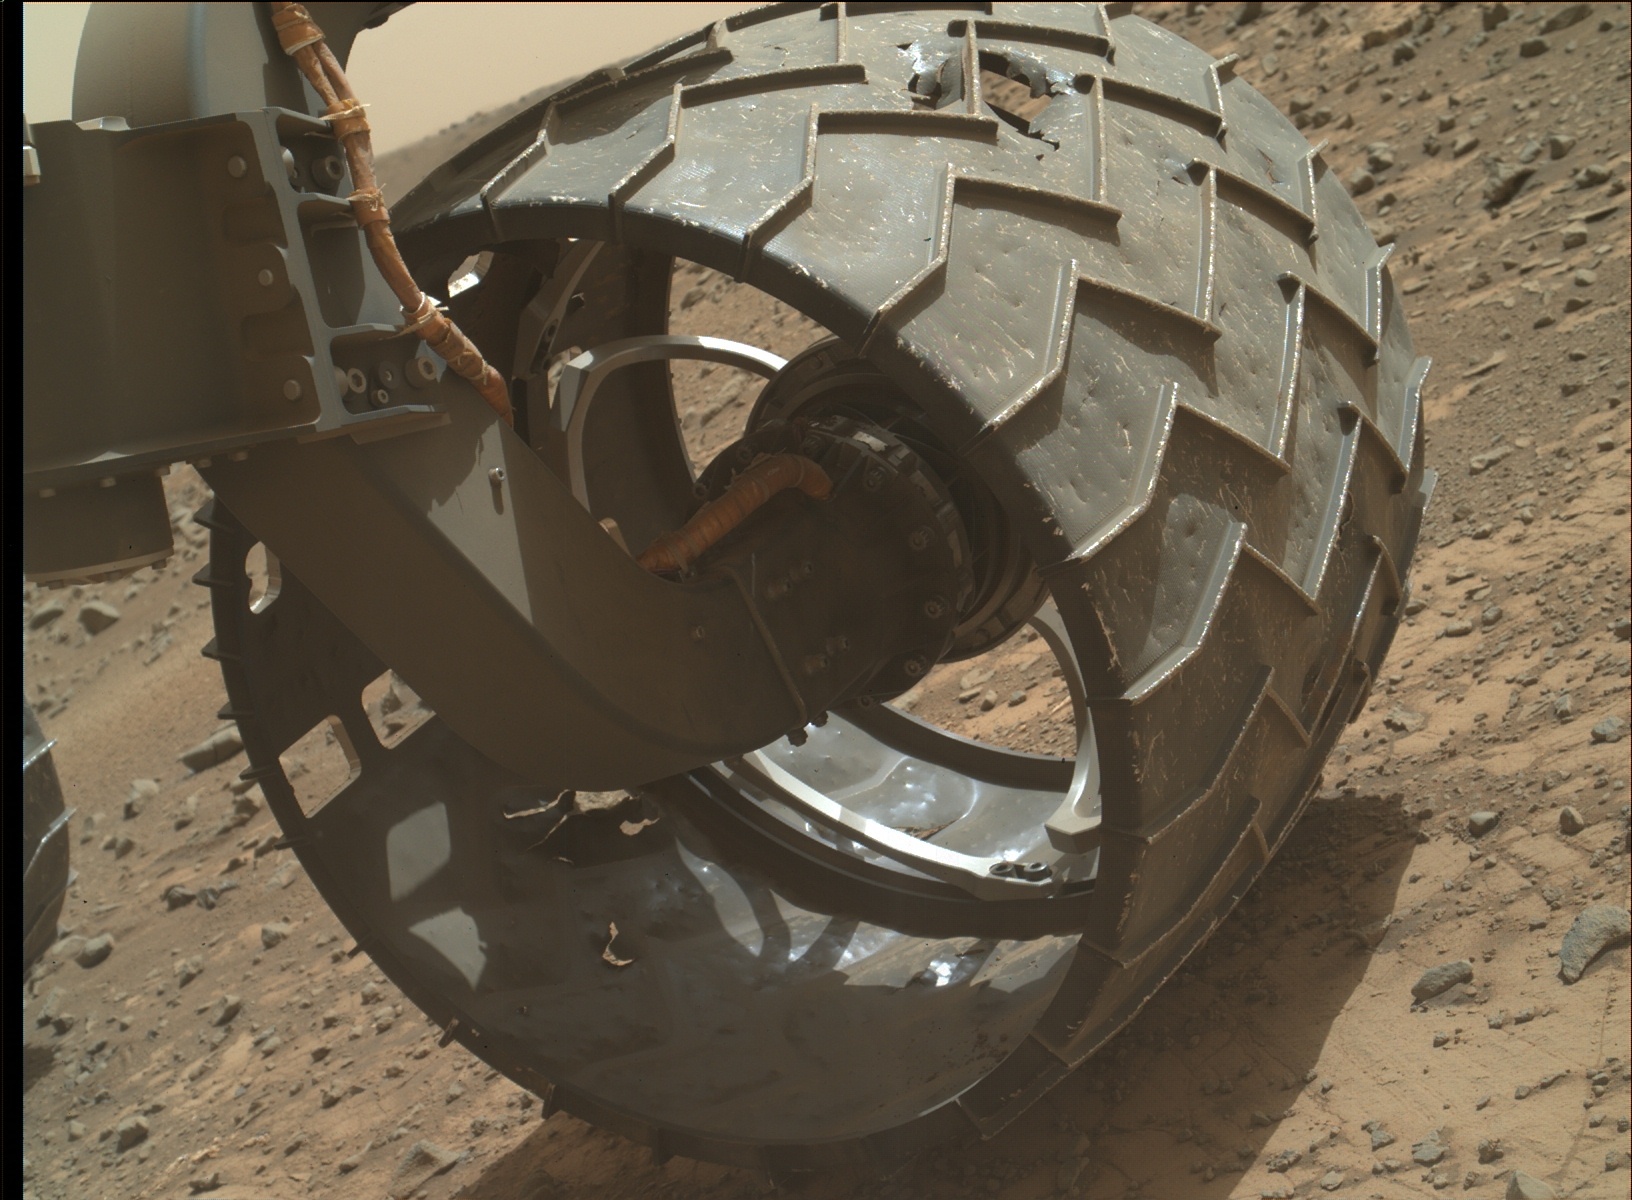 Nasa's Mars rover Curiosity acquired this image using its Mars Hand Lens Imager (MAHLI) on Sol 940